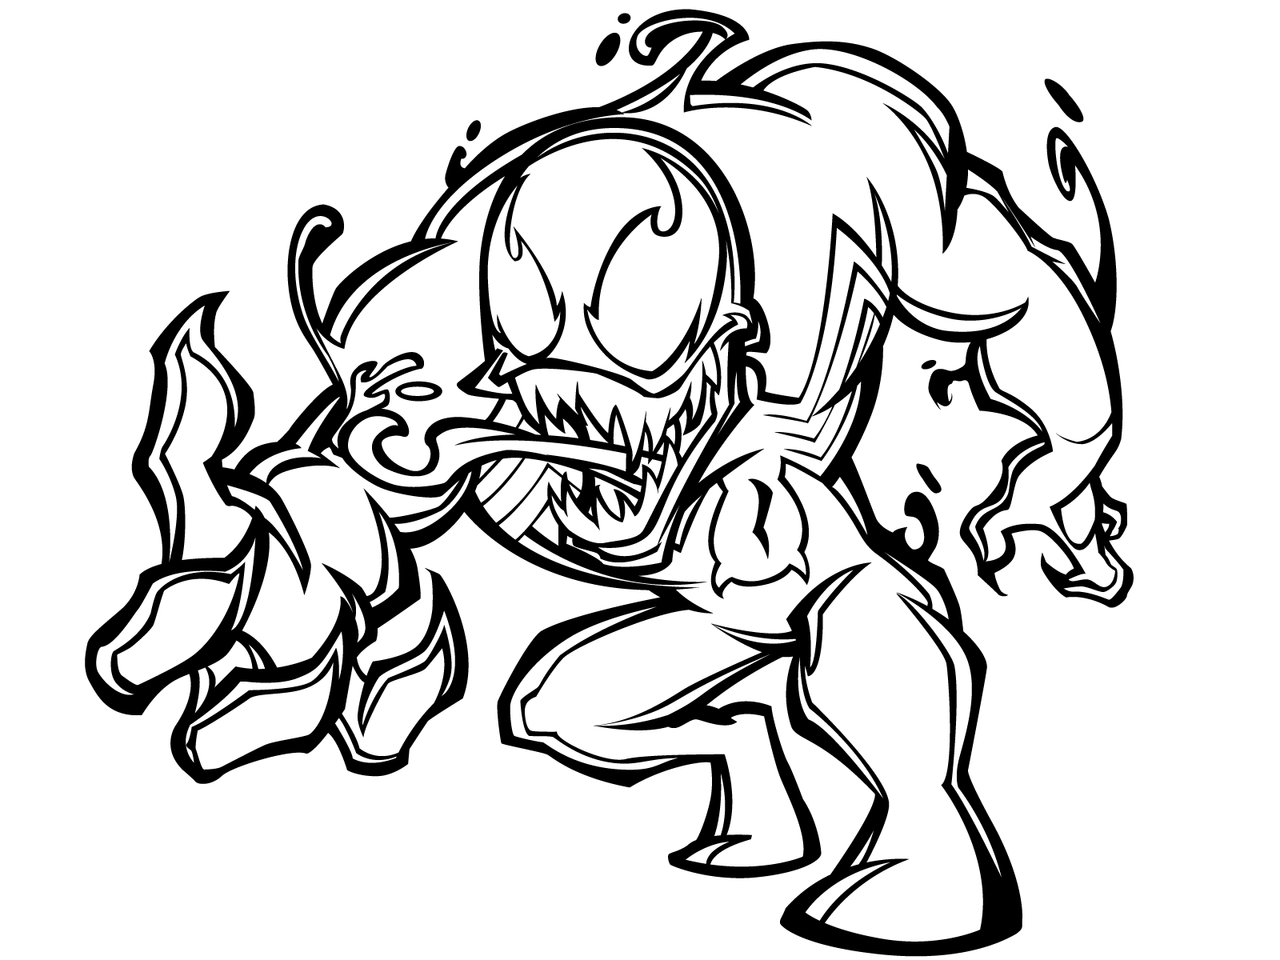 Spiderman and Venom Coloring Pages venom coloring pages 